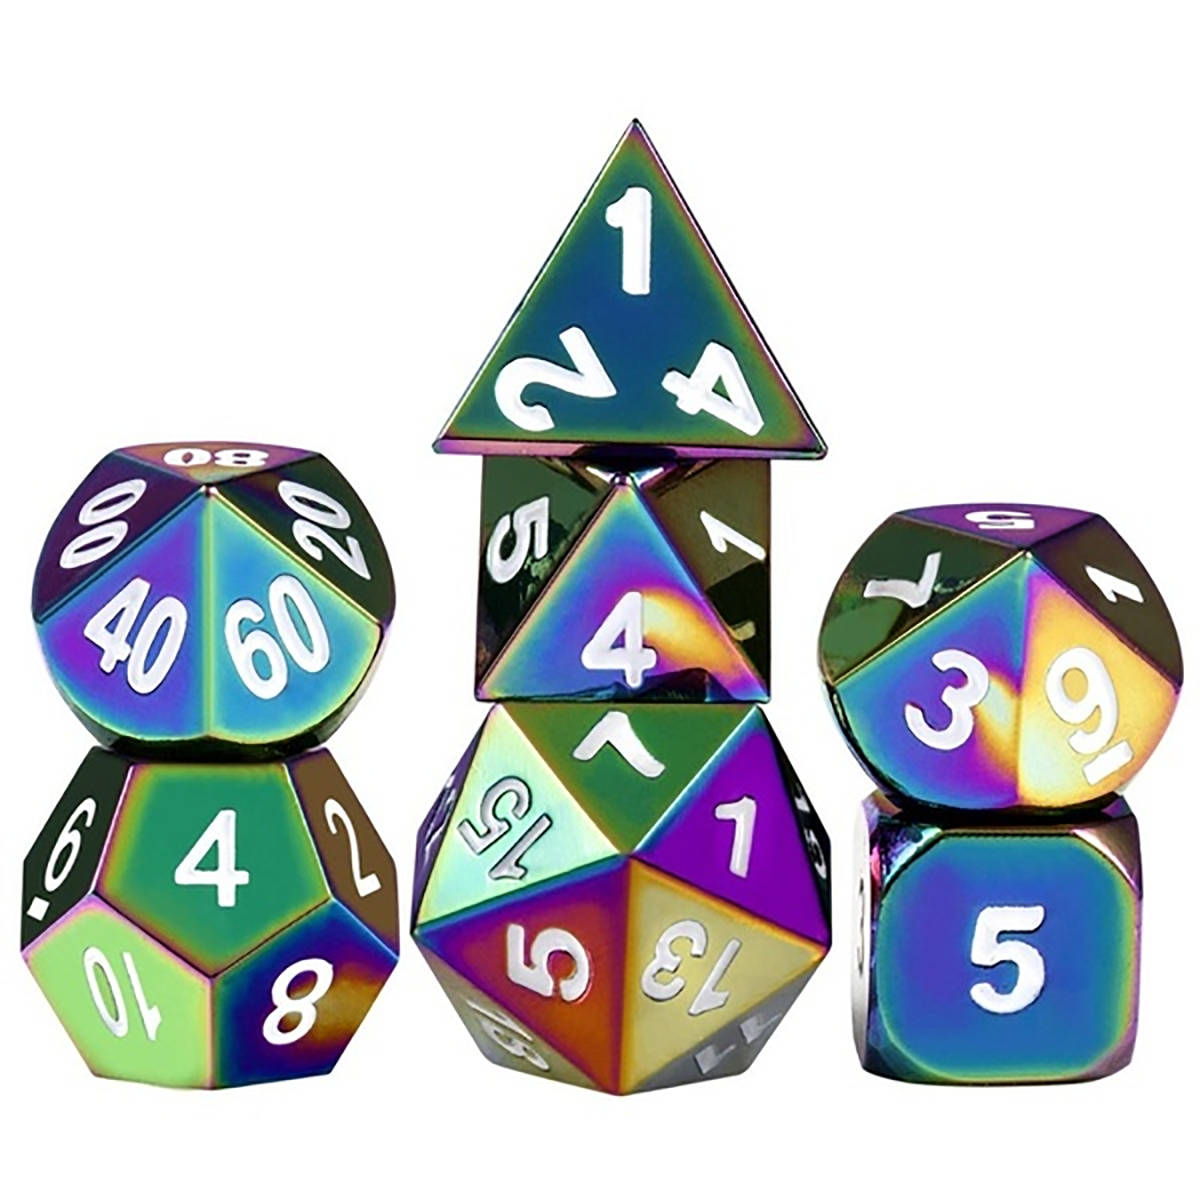 7-PcsSet-Metal-Dice-Set-Role-Playing-Dragons-Table-Game-With-Cloth-Bag-Bar-Party-Game-Dice-1677684